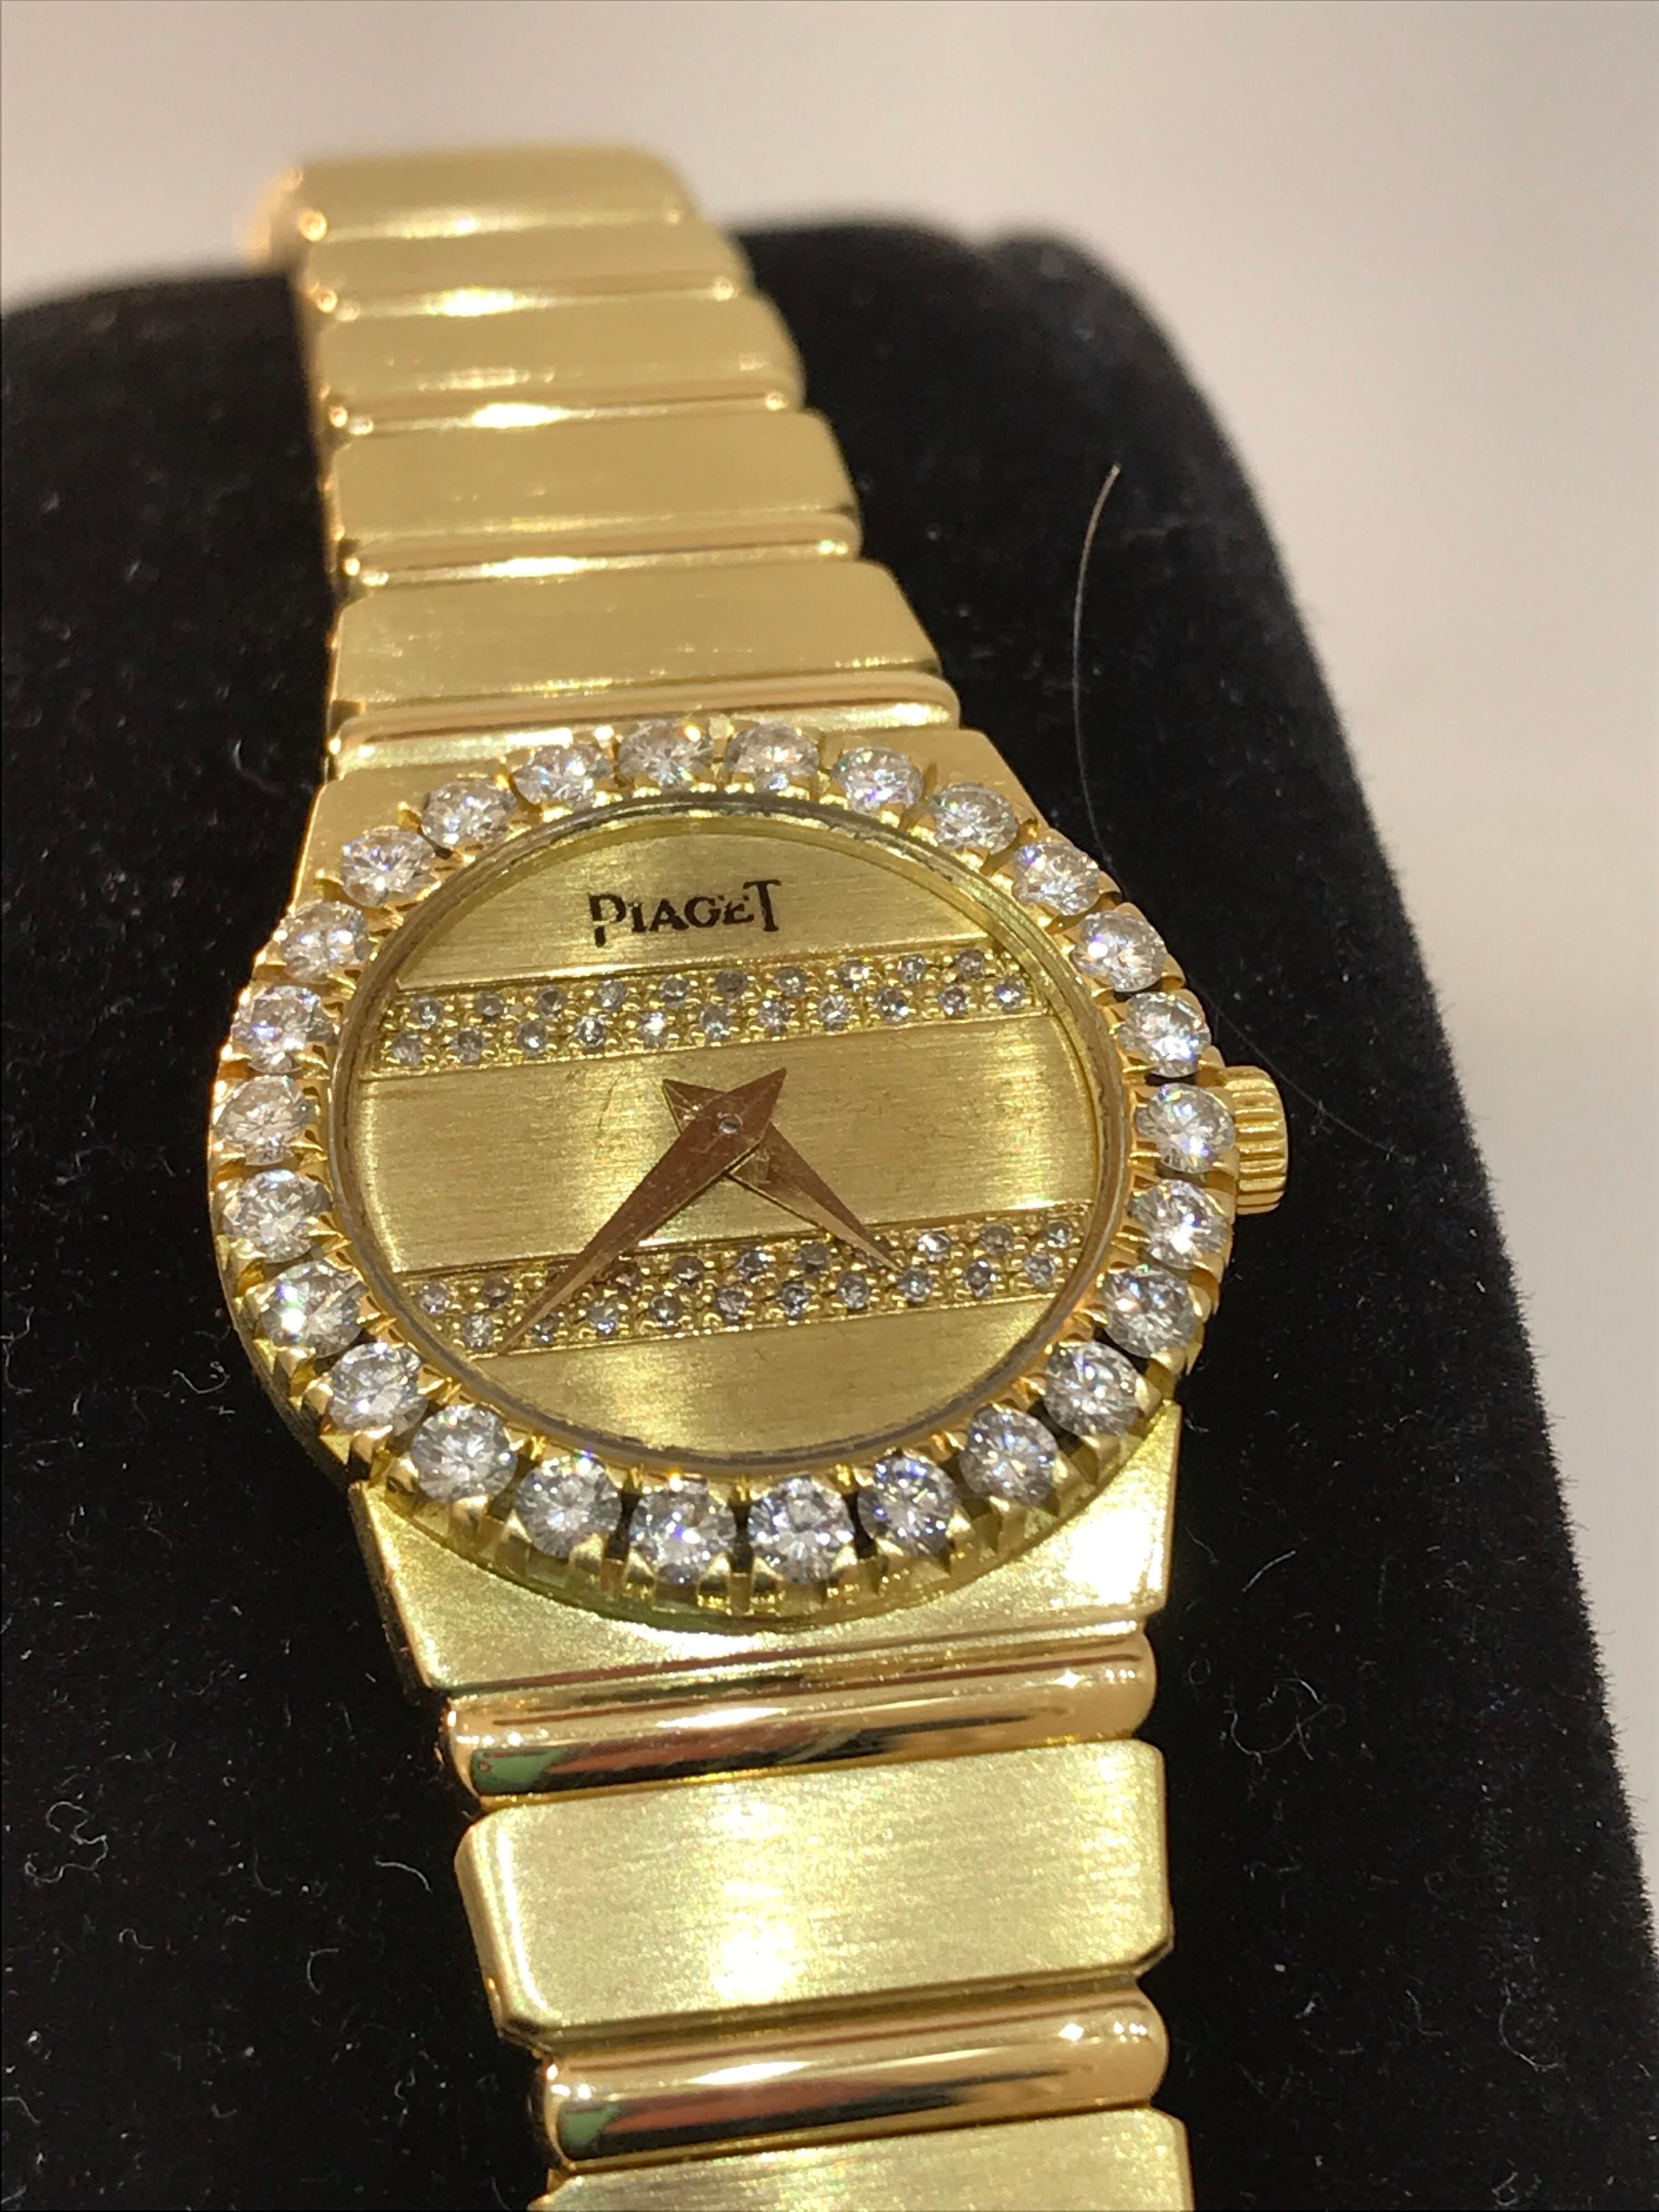 Piaget Polo 18 Karat Gold Diamond Bezel and Dial Ladies Bracelet Watch 8296 In Good Condition For Sale In New York, NY